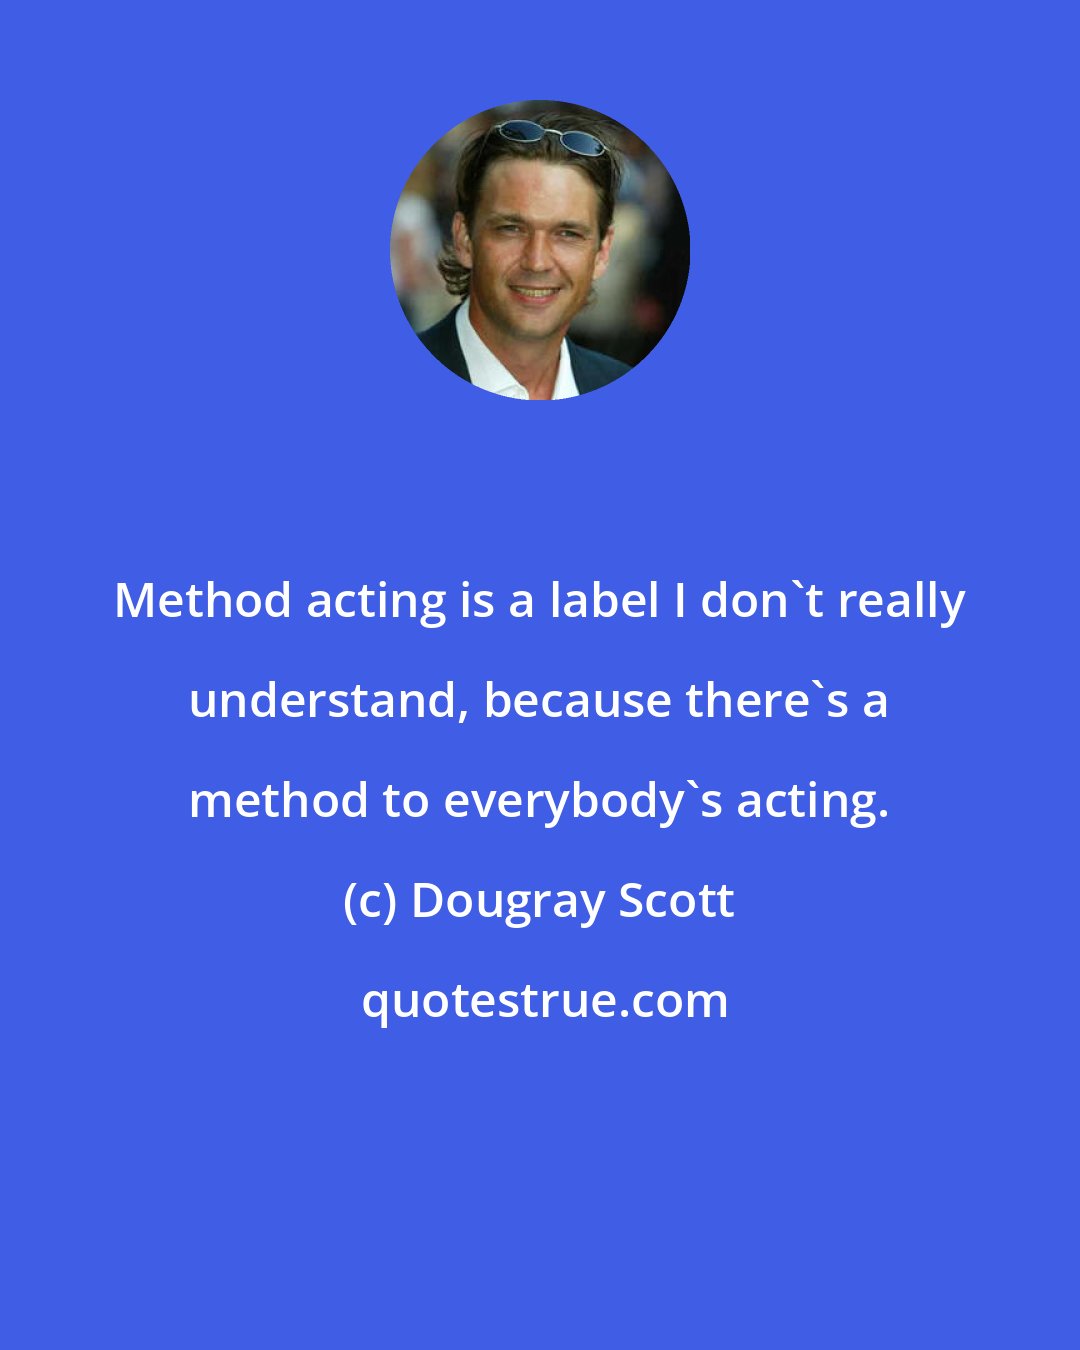 Dougray Scott: Method acting is a label I don't really understand, because there's a method to everybody's acting.